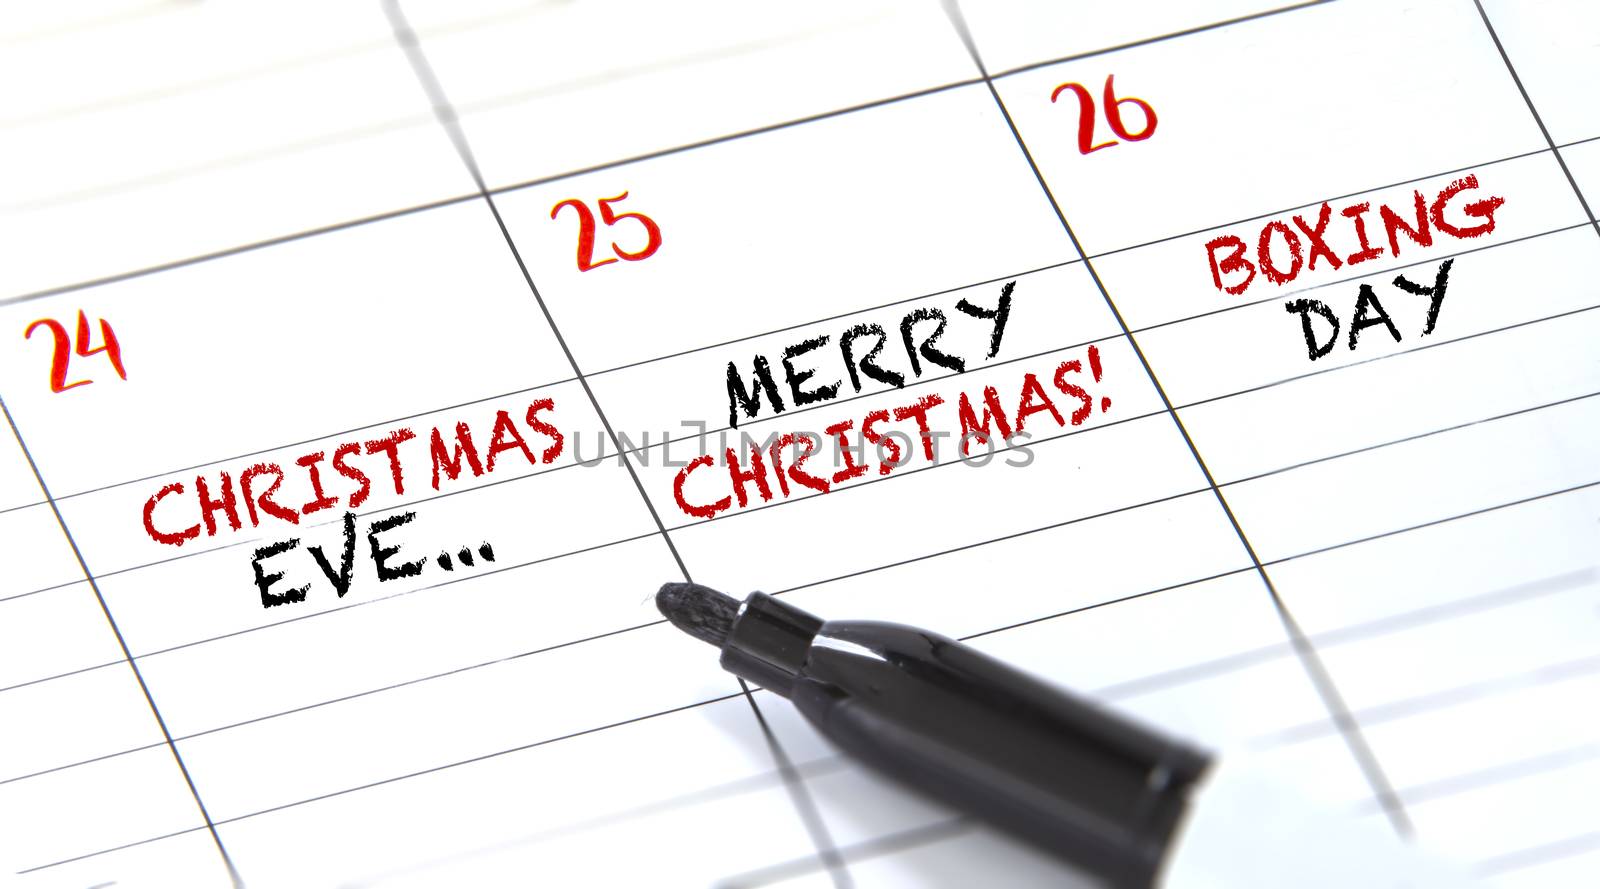 December festivities in a calendar. Christmas eve, Christmas and Boxing day.